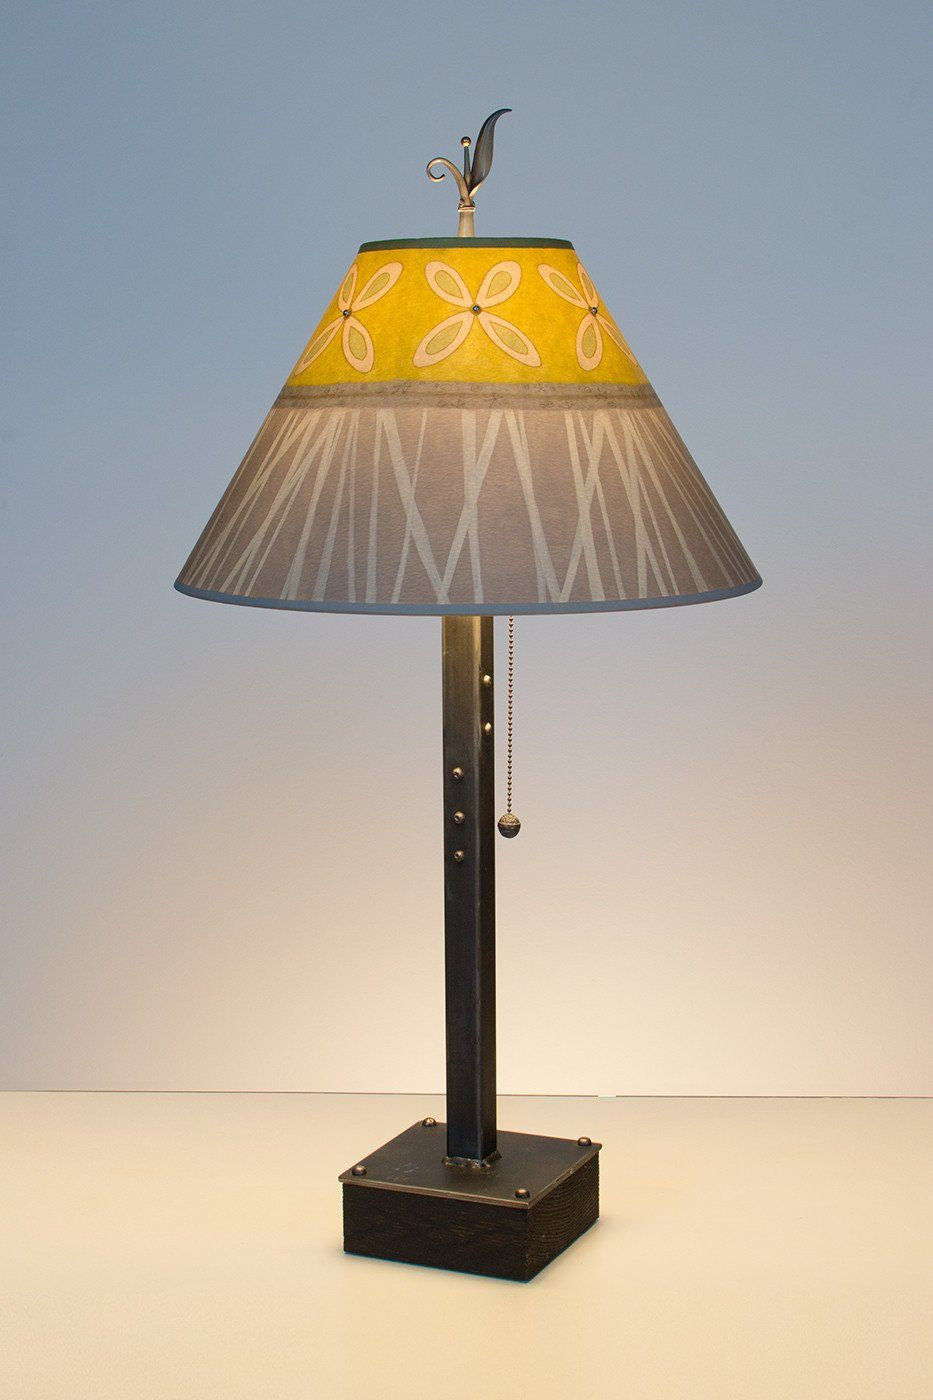 Janna Ugone & Co Table Lamps Steel Table Lamp on Wood with Medium Conical Shade in Kiwi